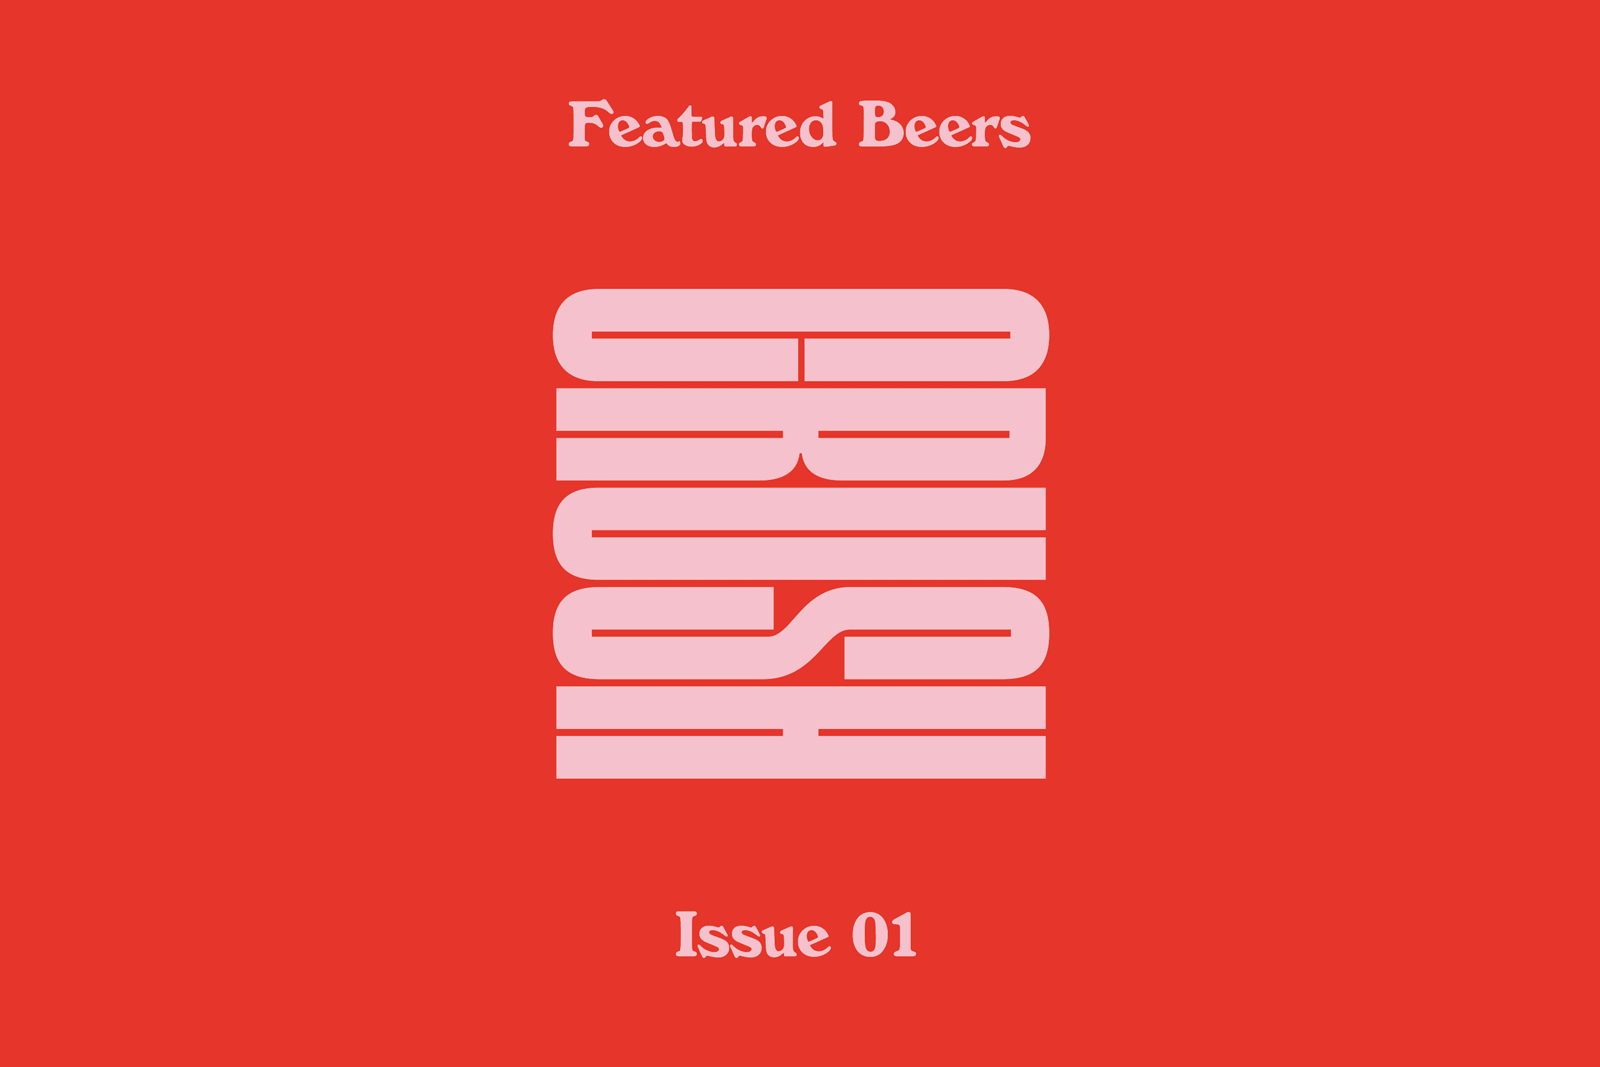 Issue 1 of Crush Beer featured beers - crushed can gif